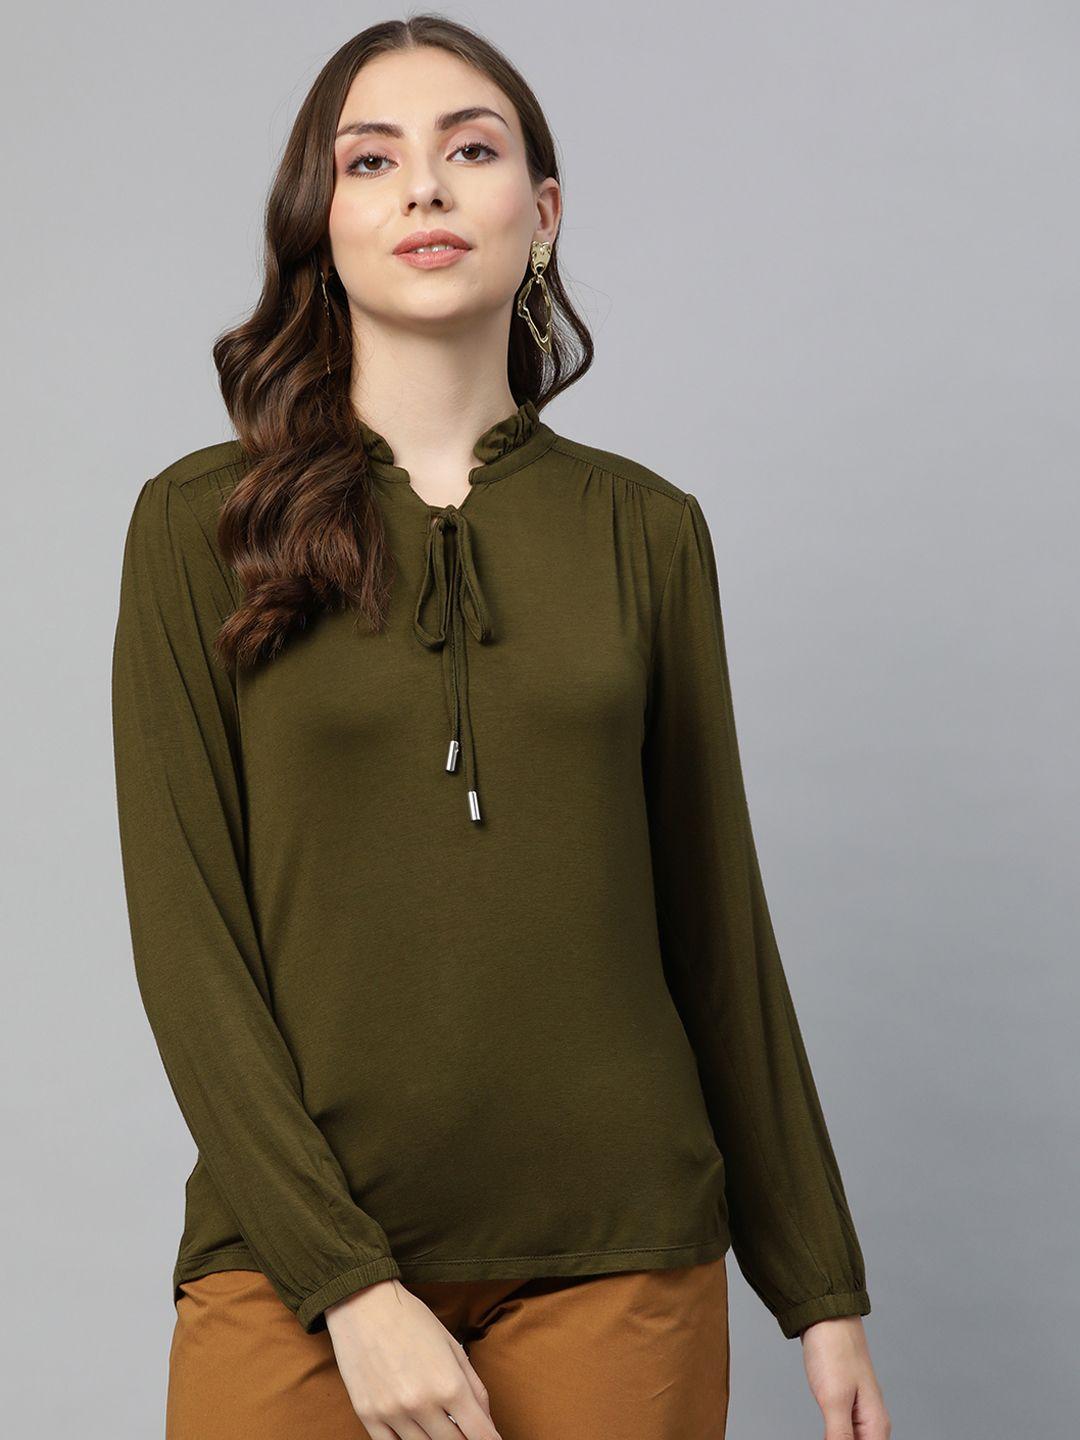 marks & spencer olive green tie-up neck long puff sleeve top